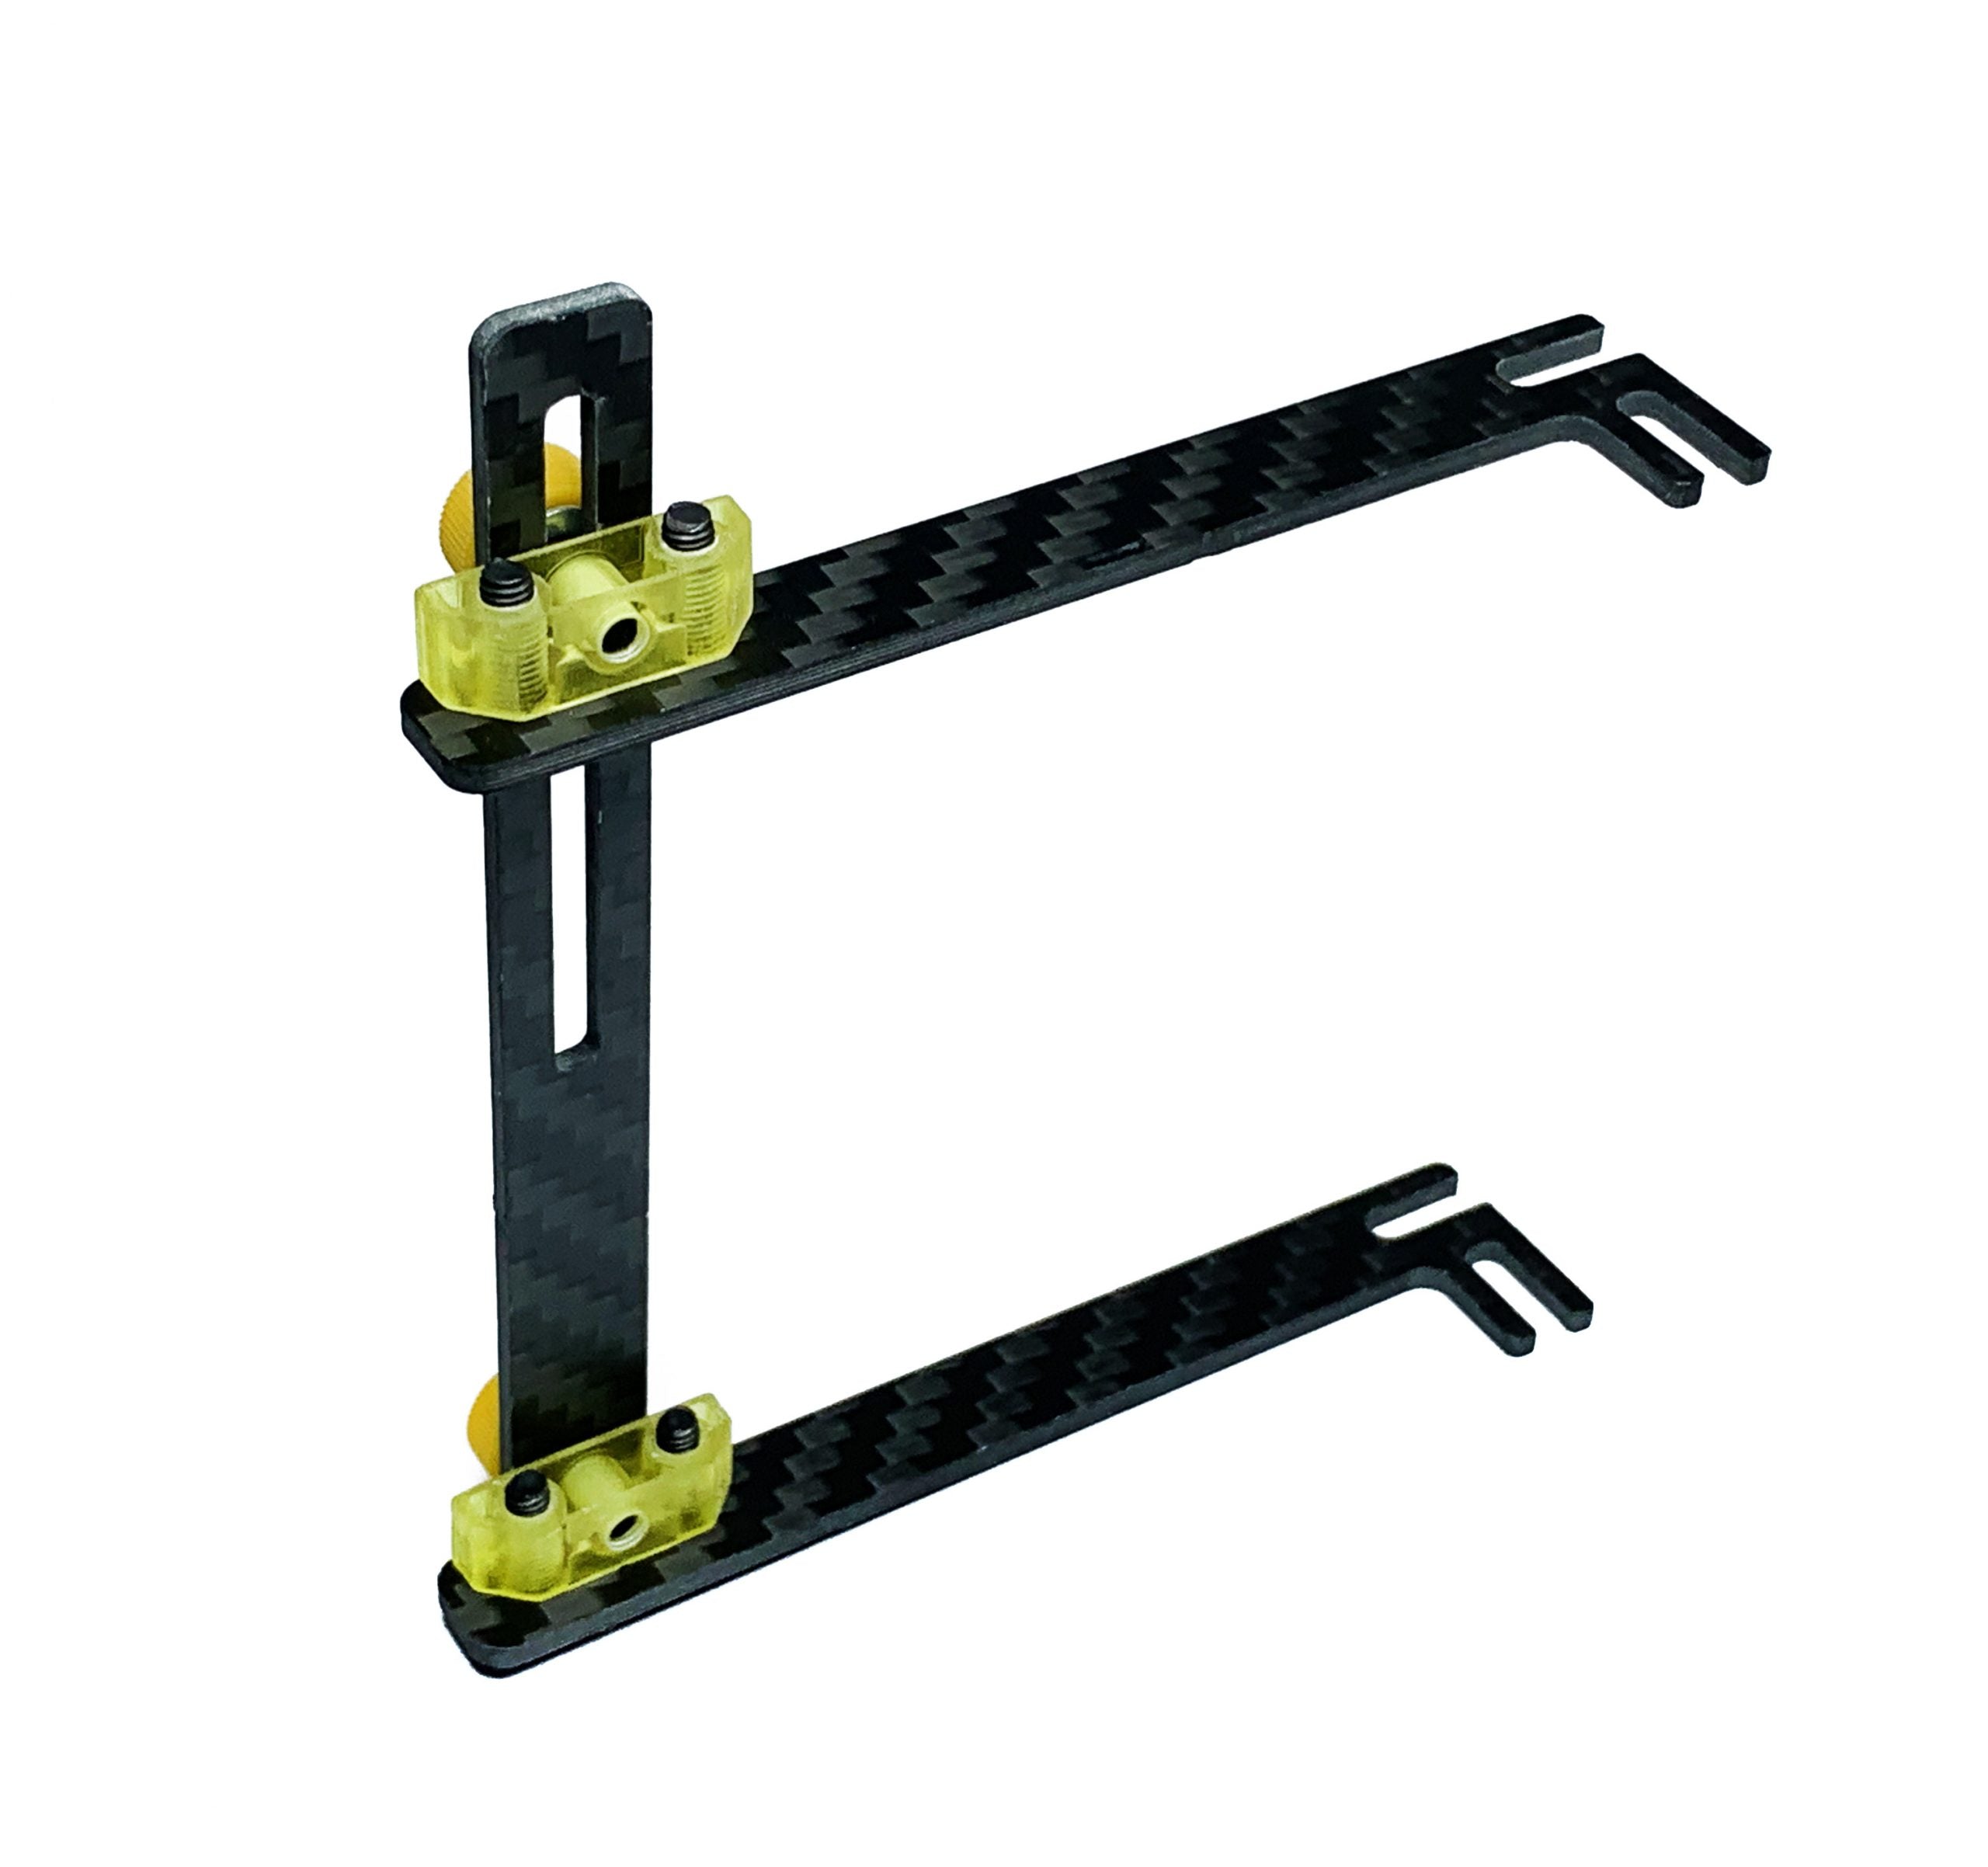 Ball Links Holder tool for Turnbuckle Pitch Adjustment